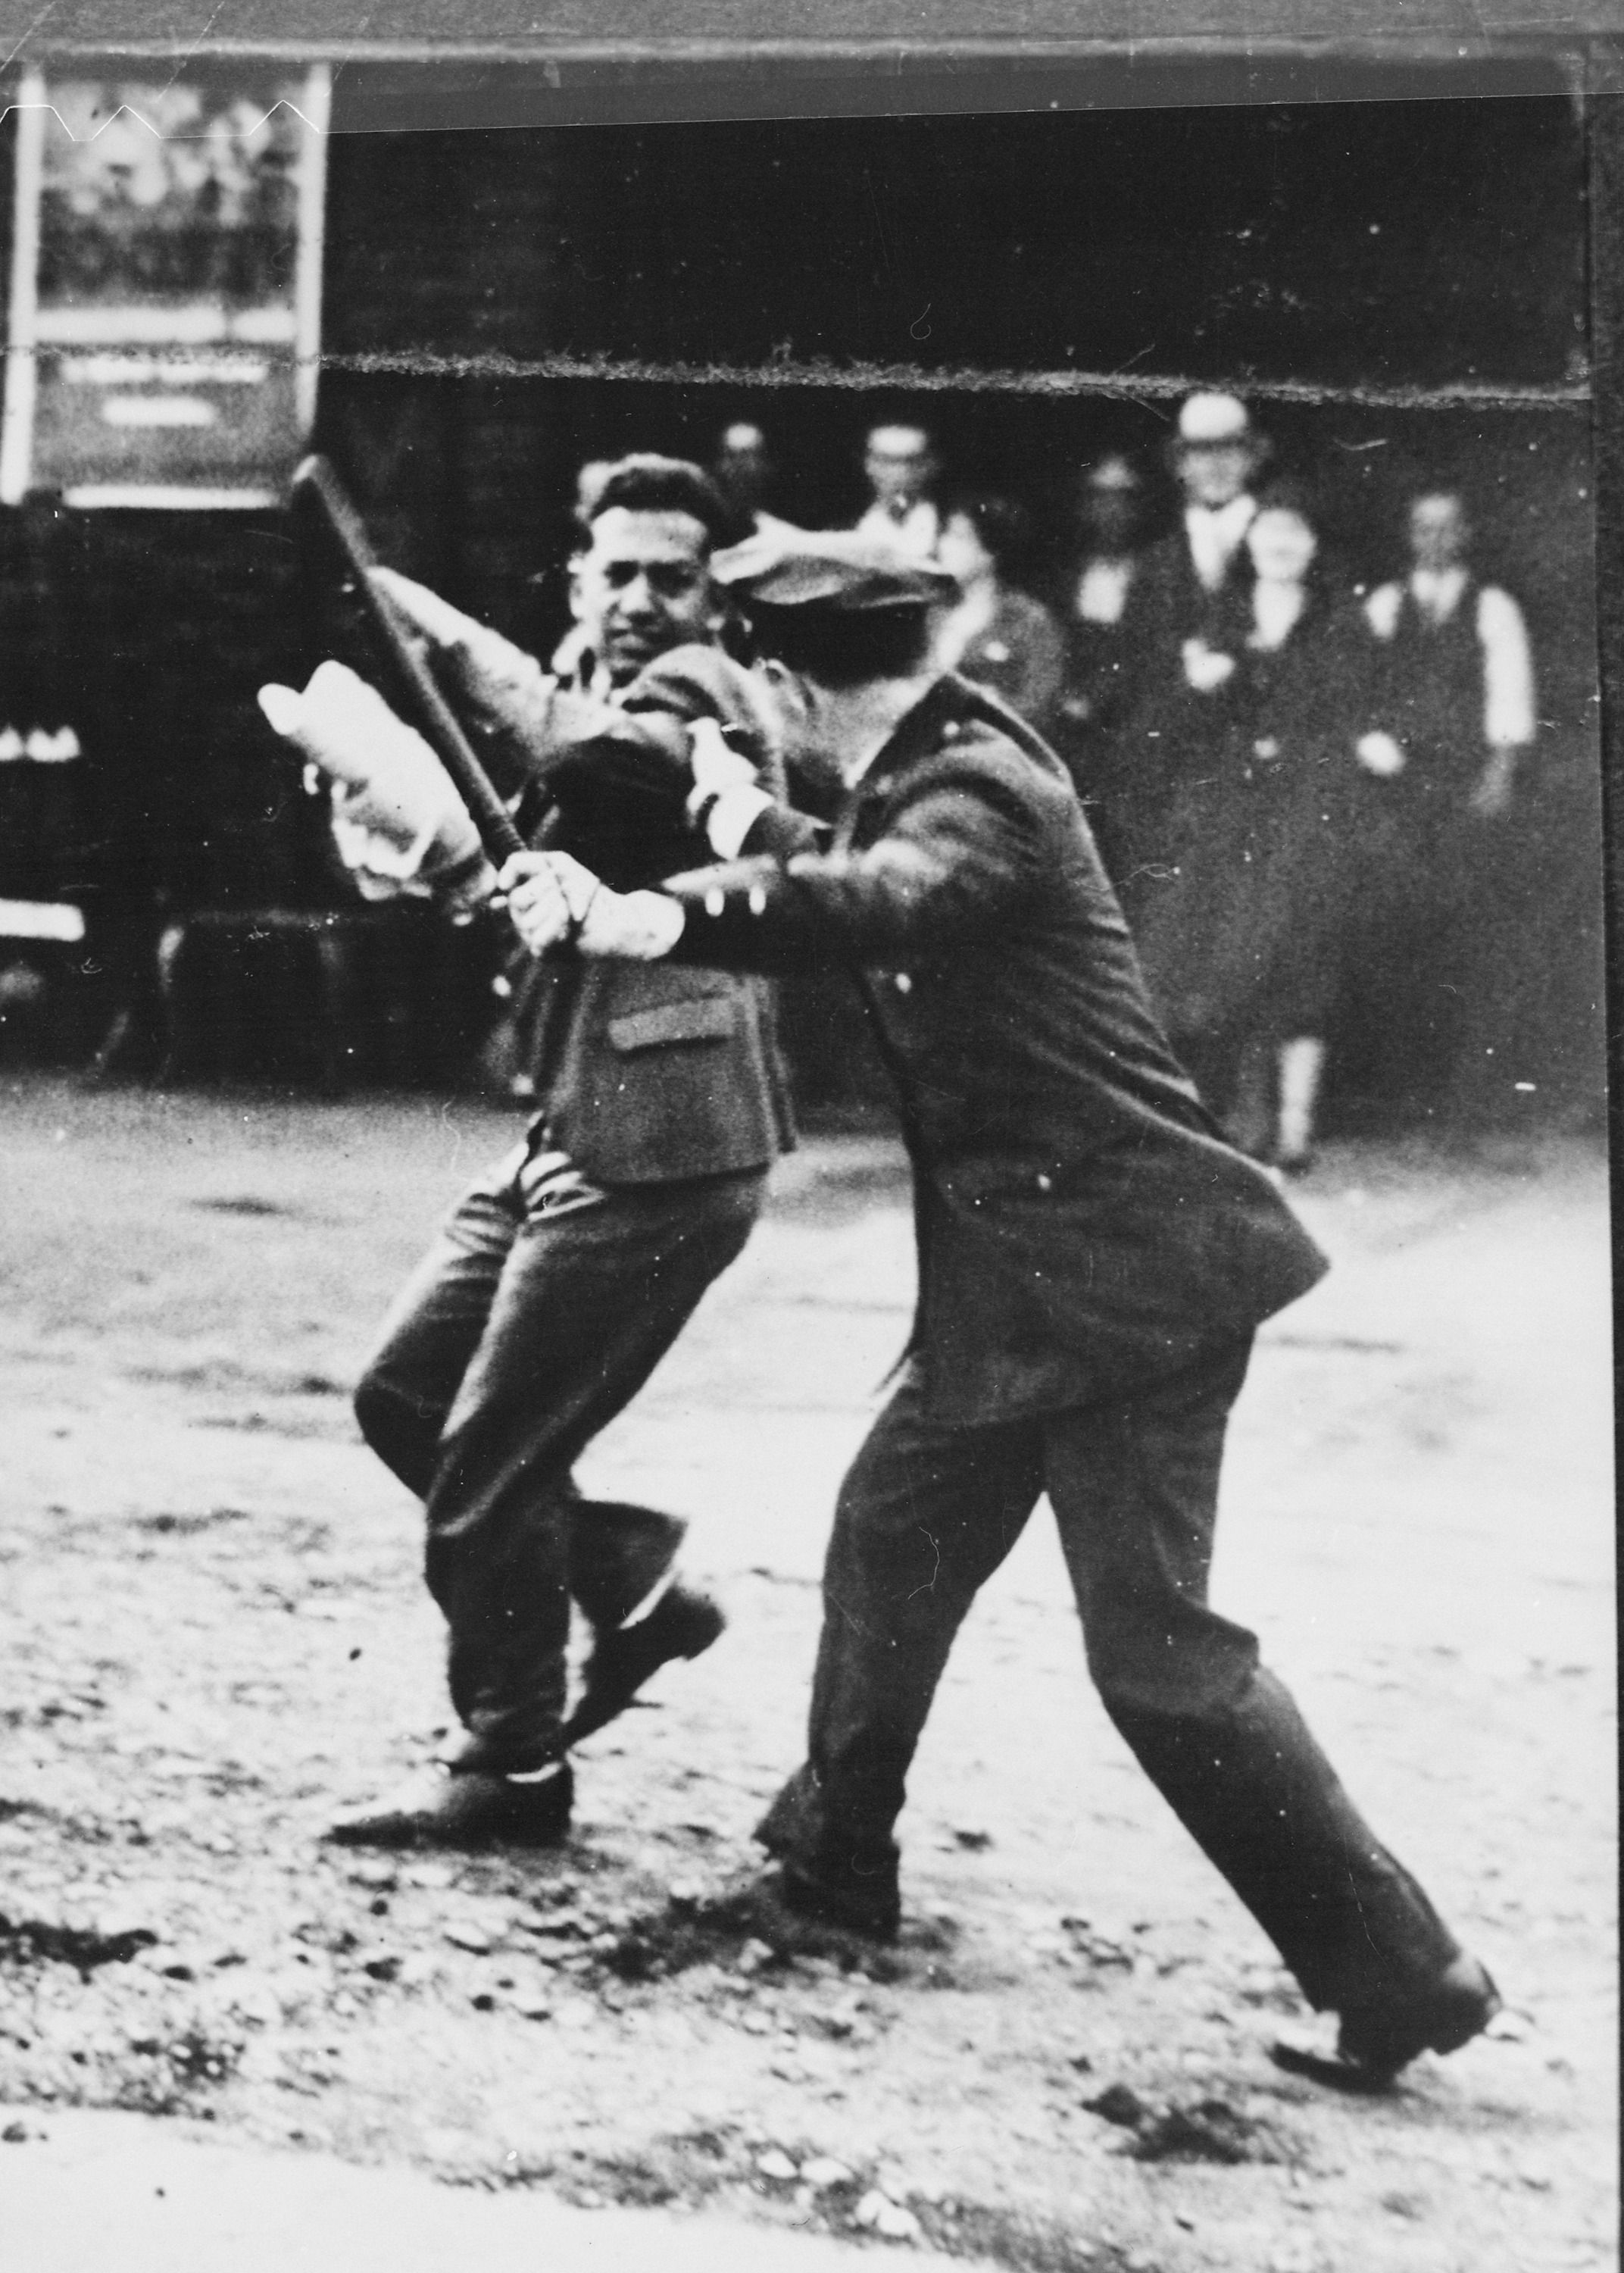 Confrontation_between_a_policeman_wielding_a_night_stick_and_a_striker_during_the_San_Francisco_General_Strike%2C_1934_-_NARA_-_541926.jpg